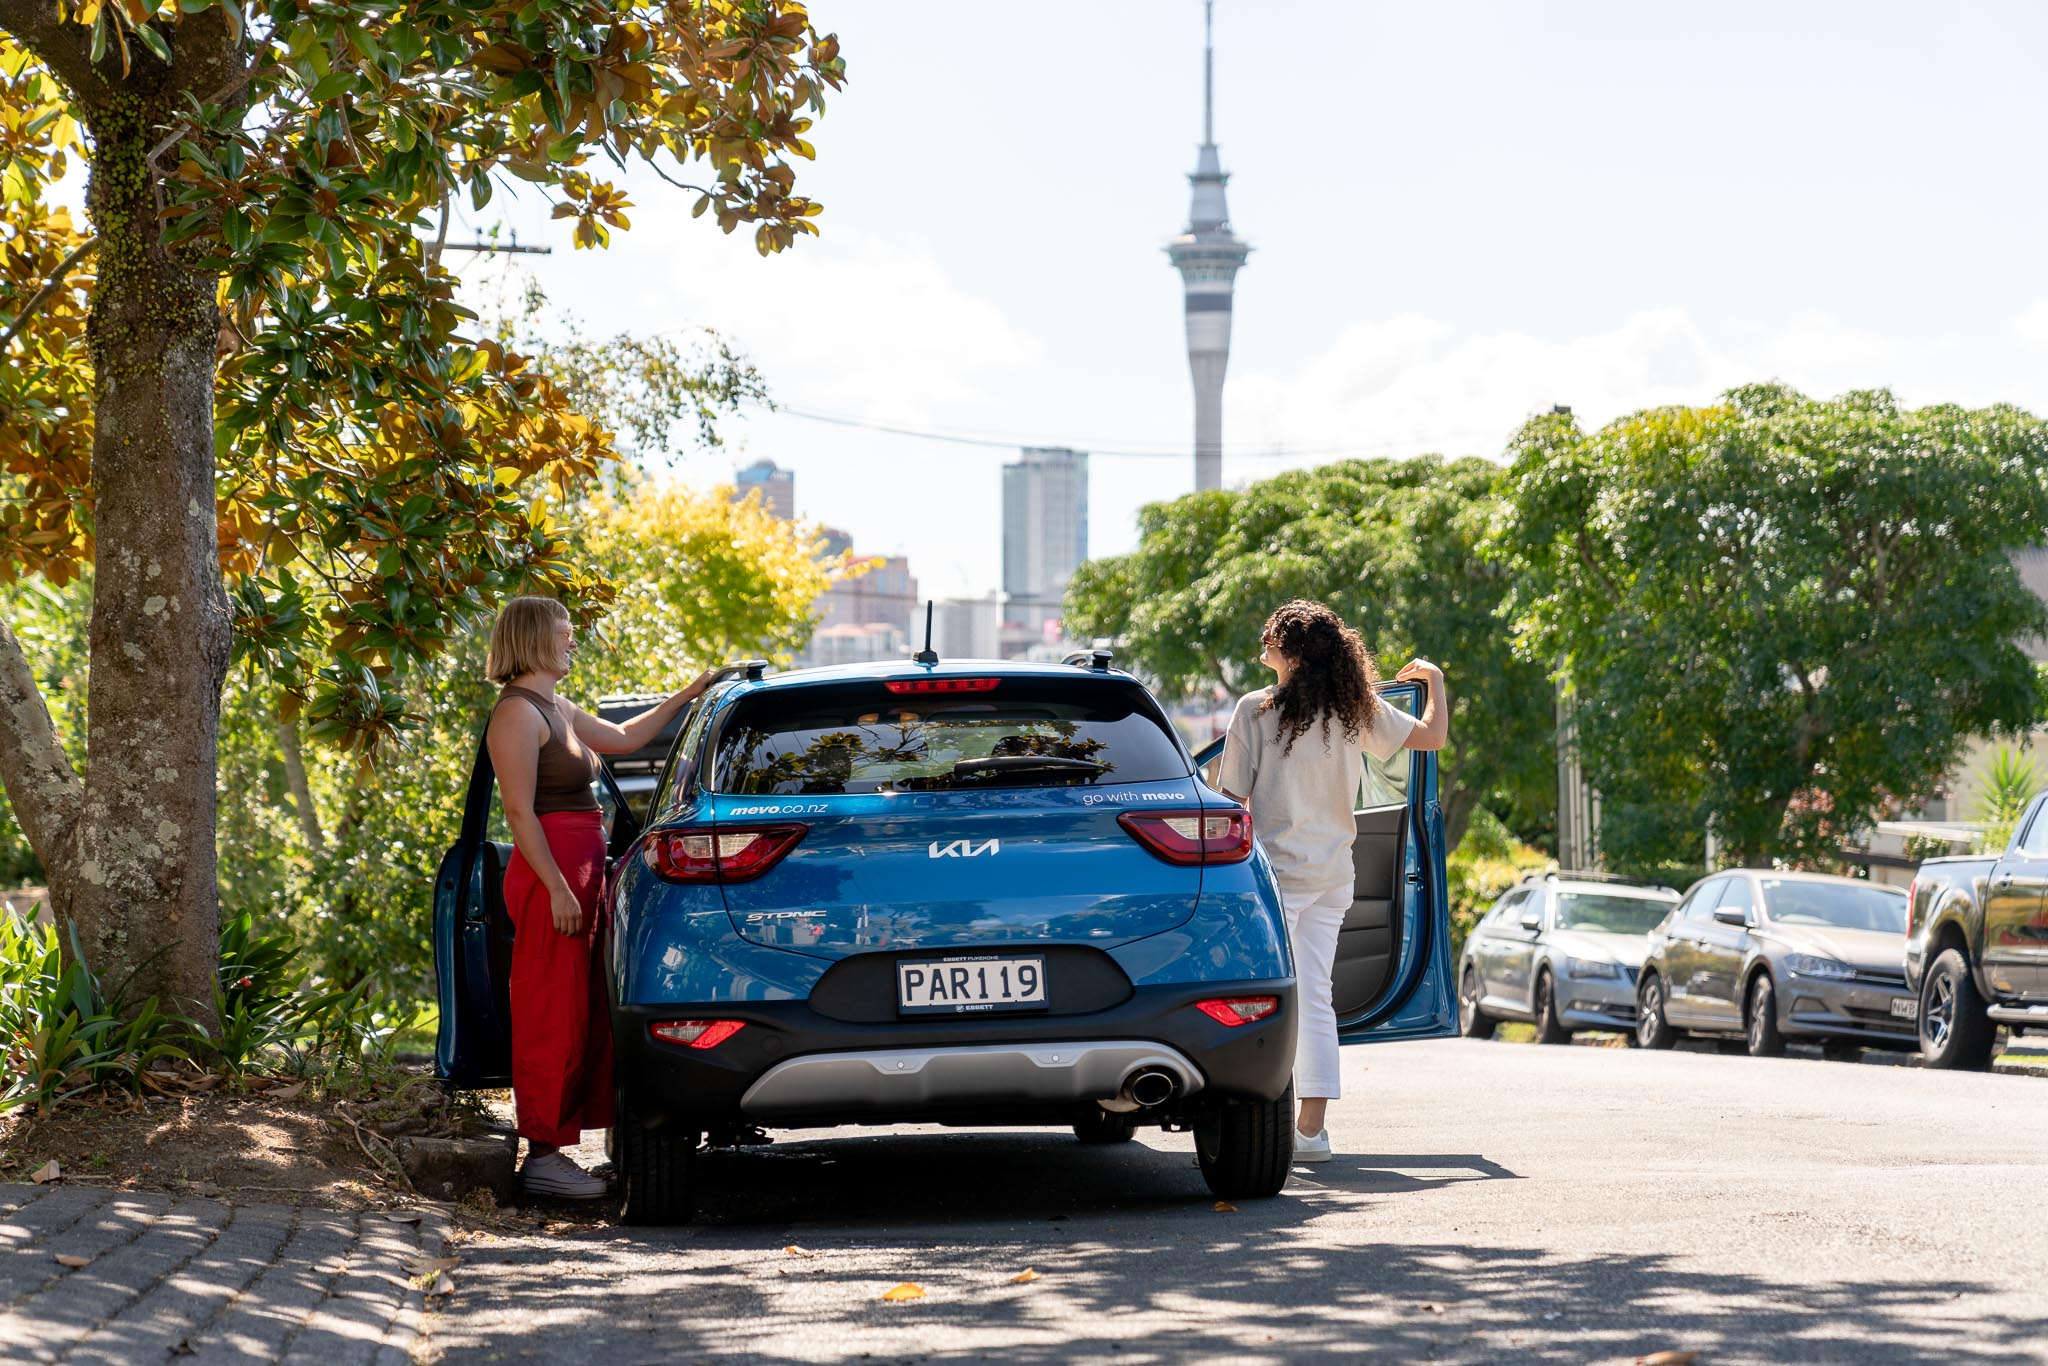 Two women getting into a Mevo car in Ponsonby, Auckland. The Sky Tower can be seen in the background.